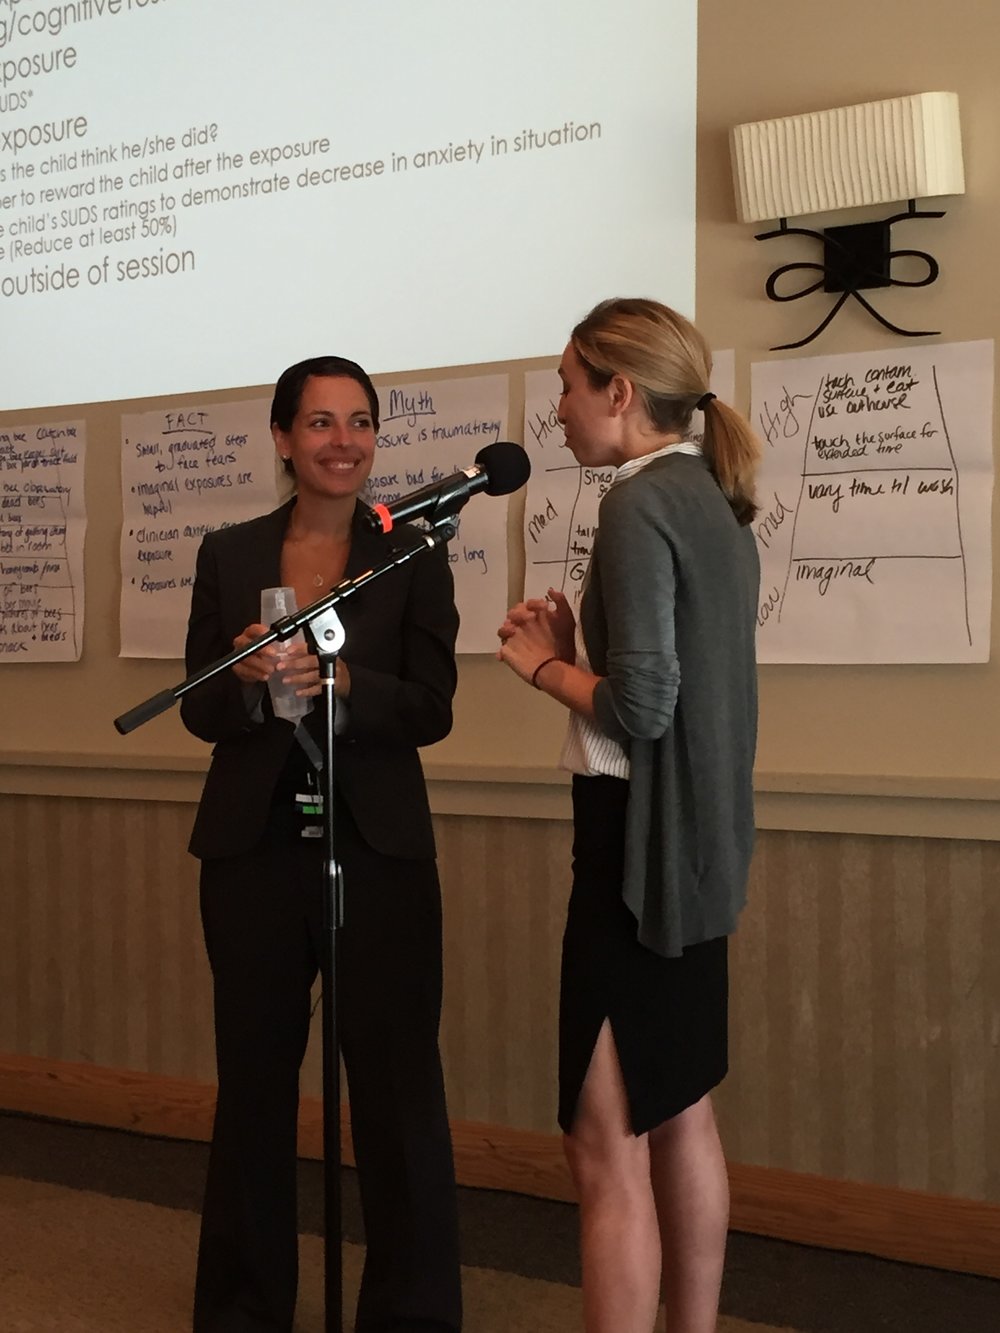 Rinad Beidas, PhD and Emily Becker Haimes, PhD demonstrate how to conduct an exposure with community clinicians in Seattle, Washington (August, 2016)